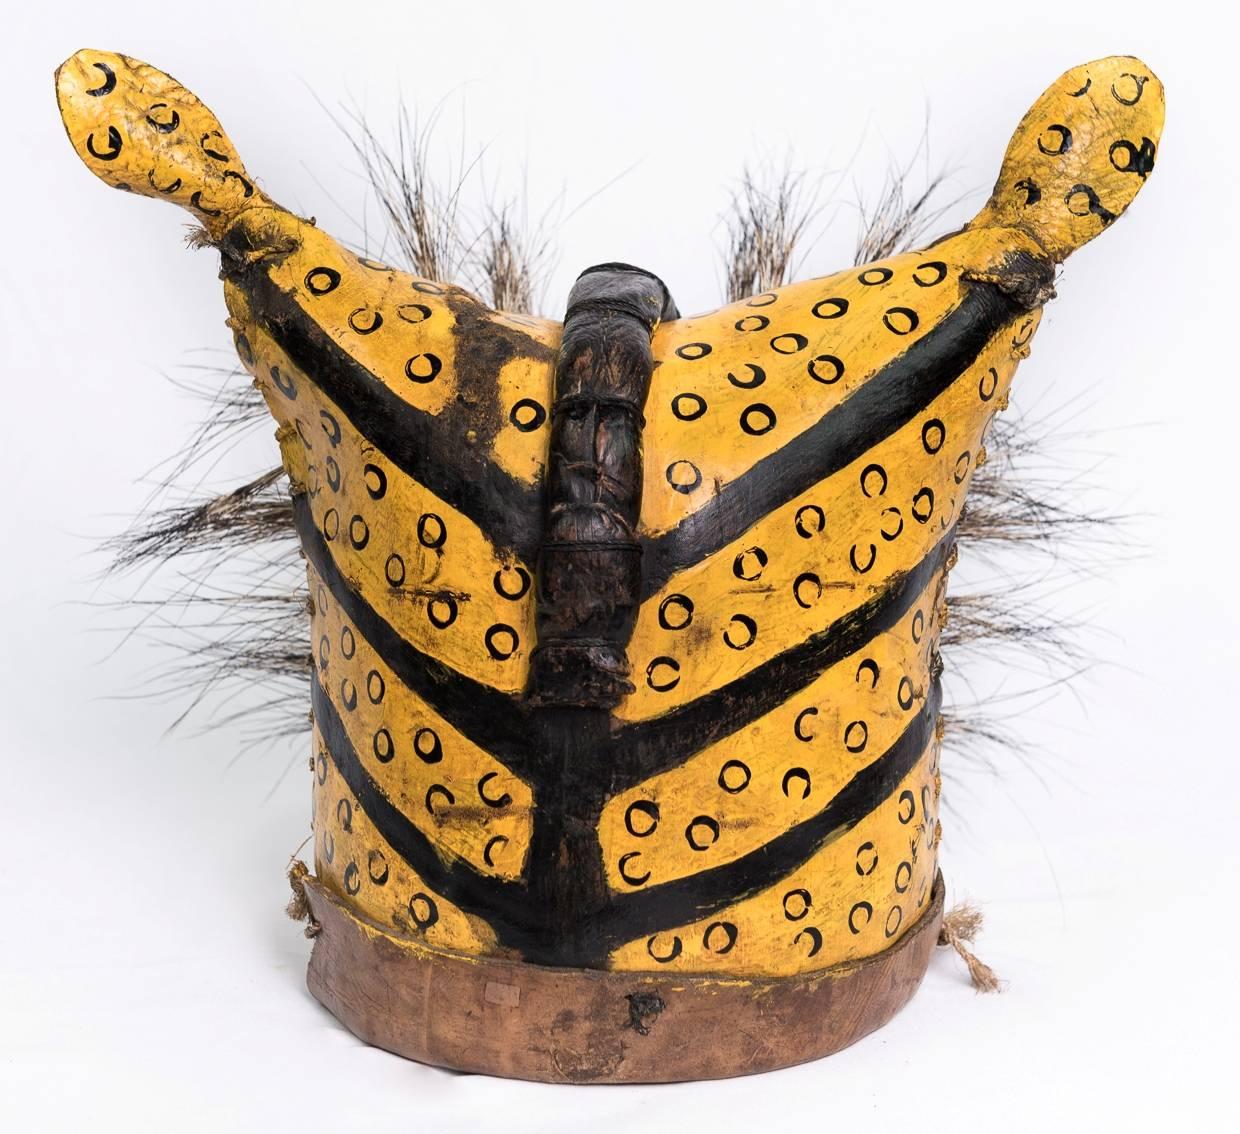 Leather Jaguar Ceremonial Masks from Zitlala Guerrero, Mexico For Sale 1